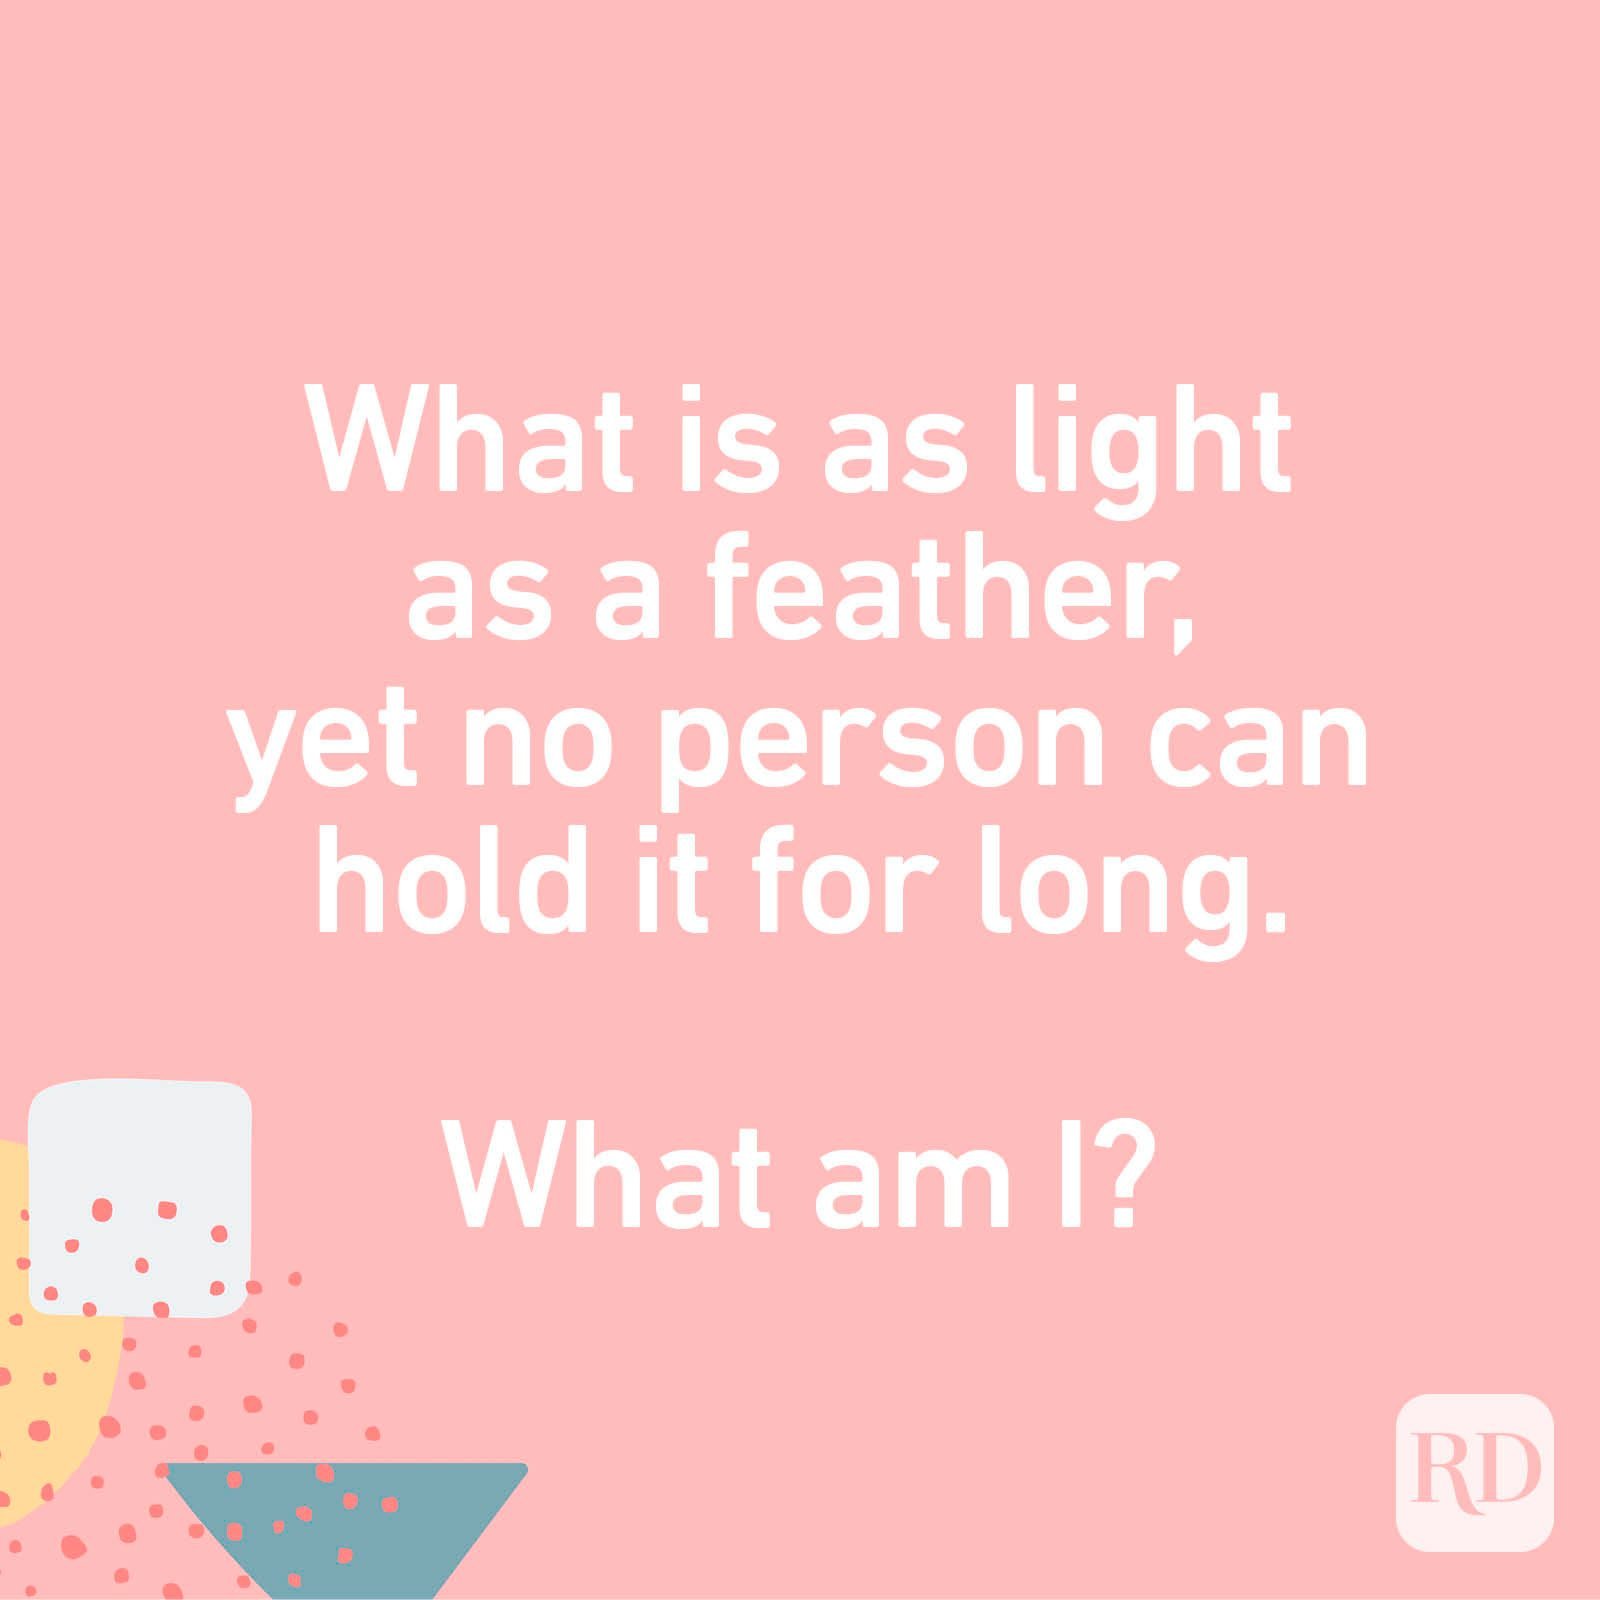 What Am I? Riddles (with Answers)